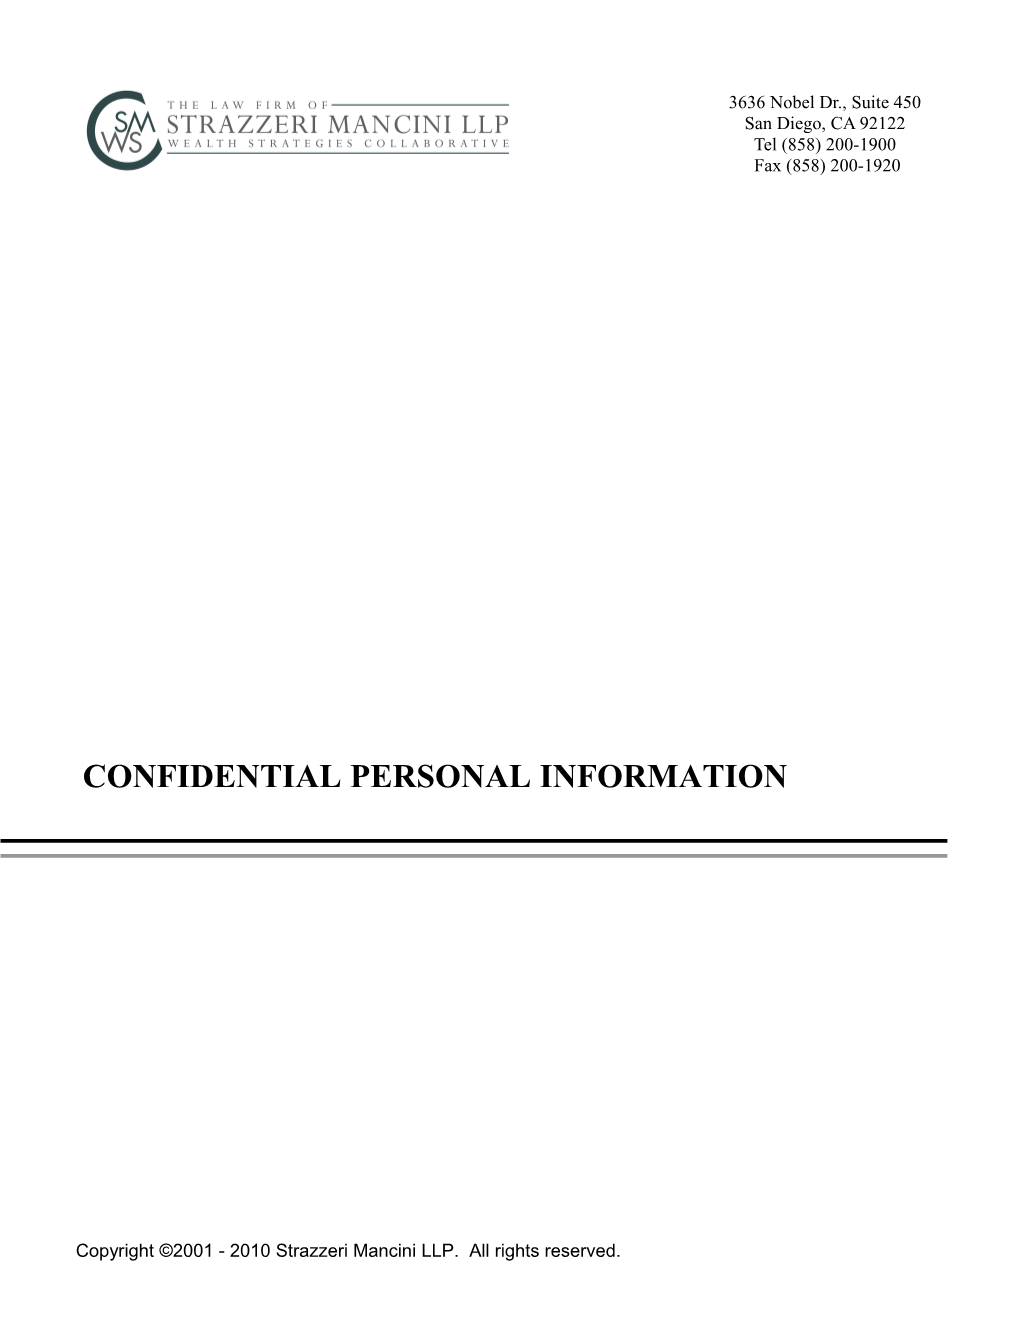 Personal Information s23